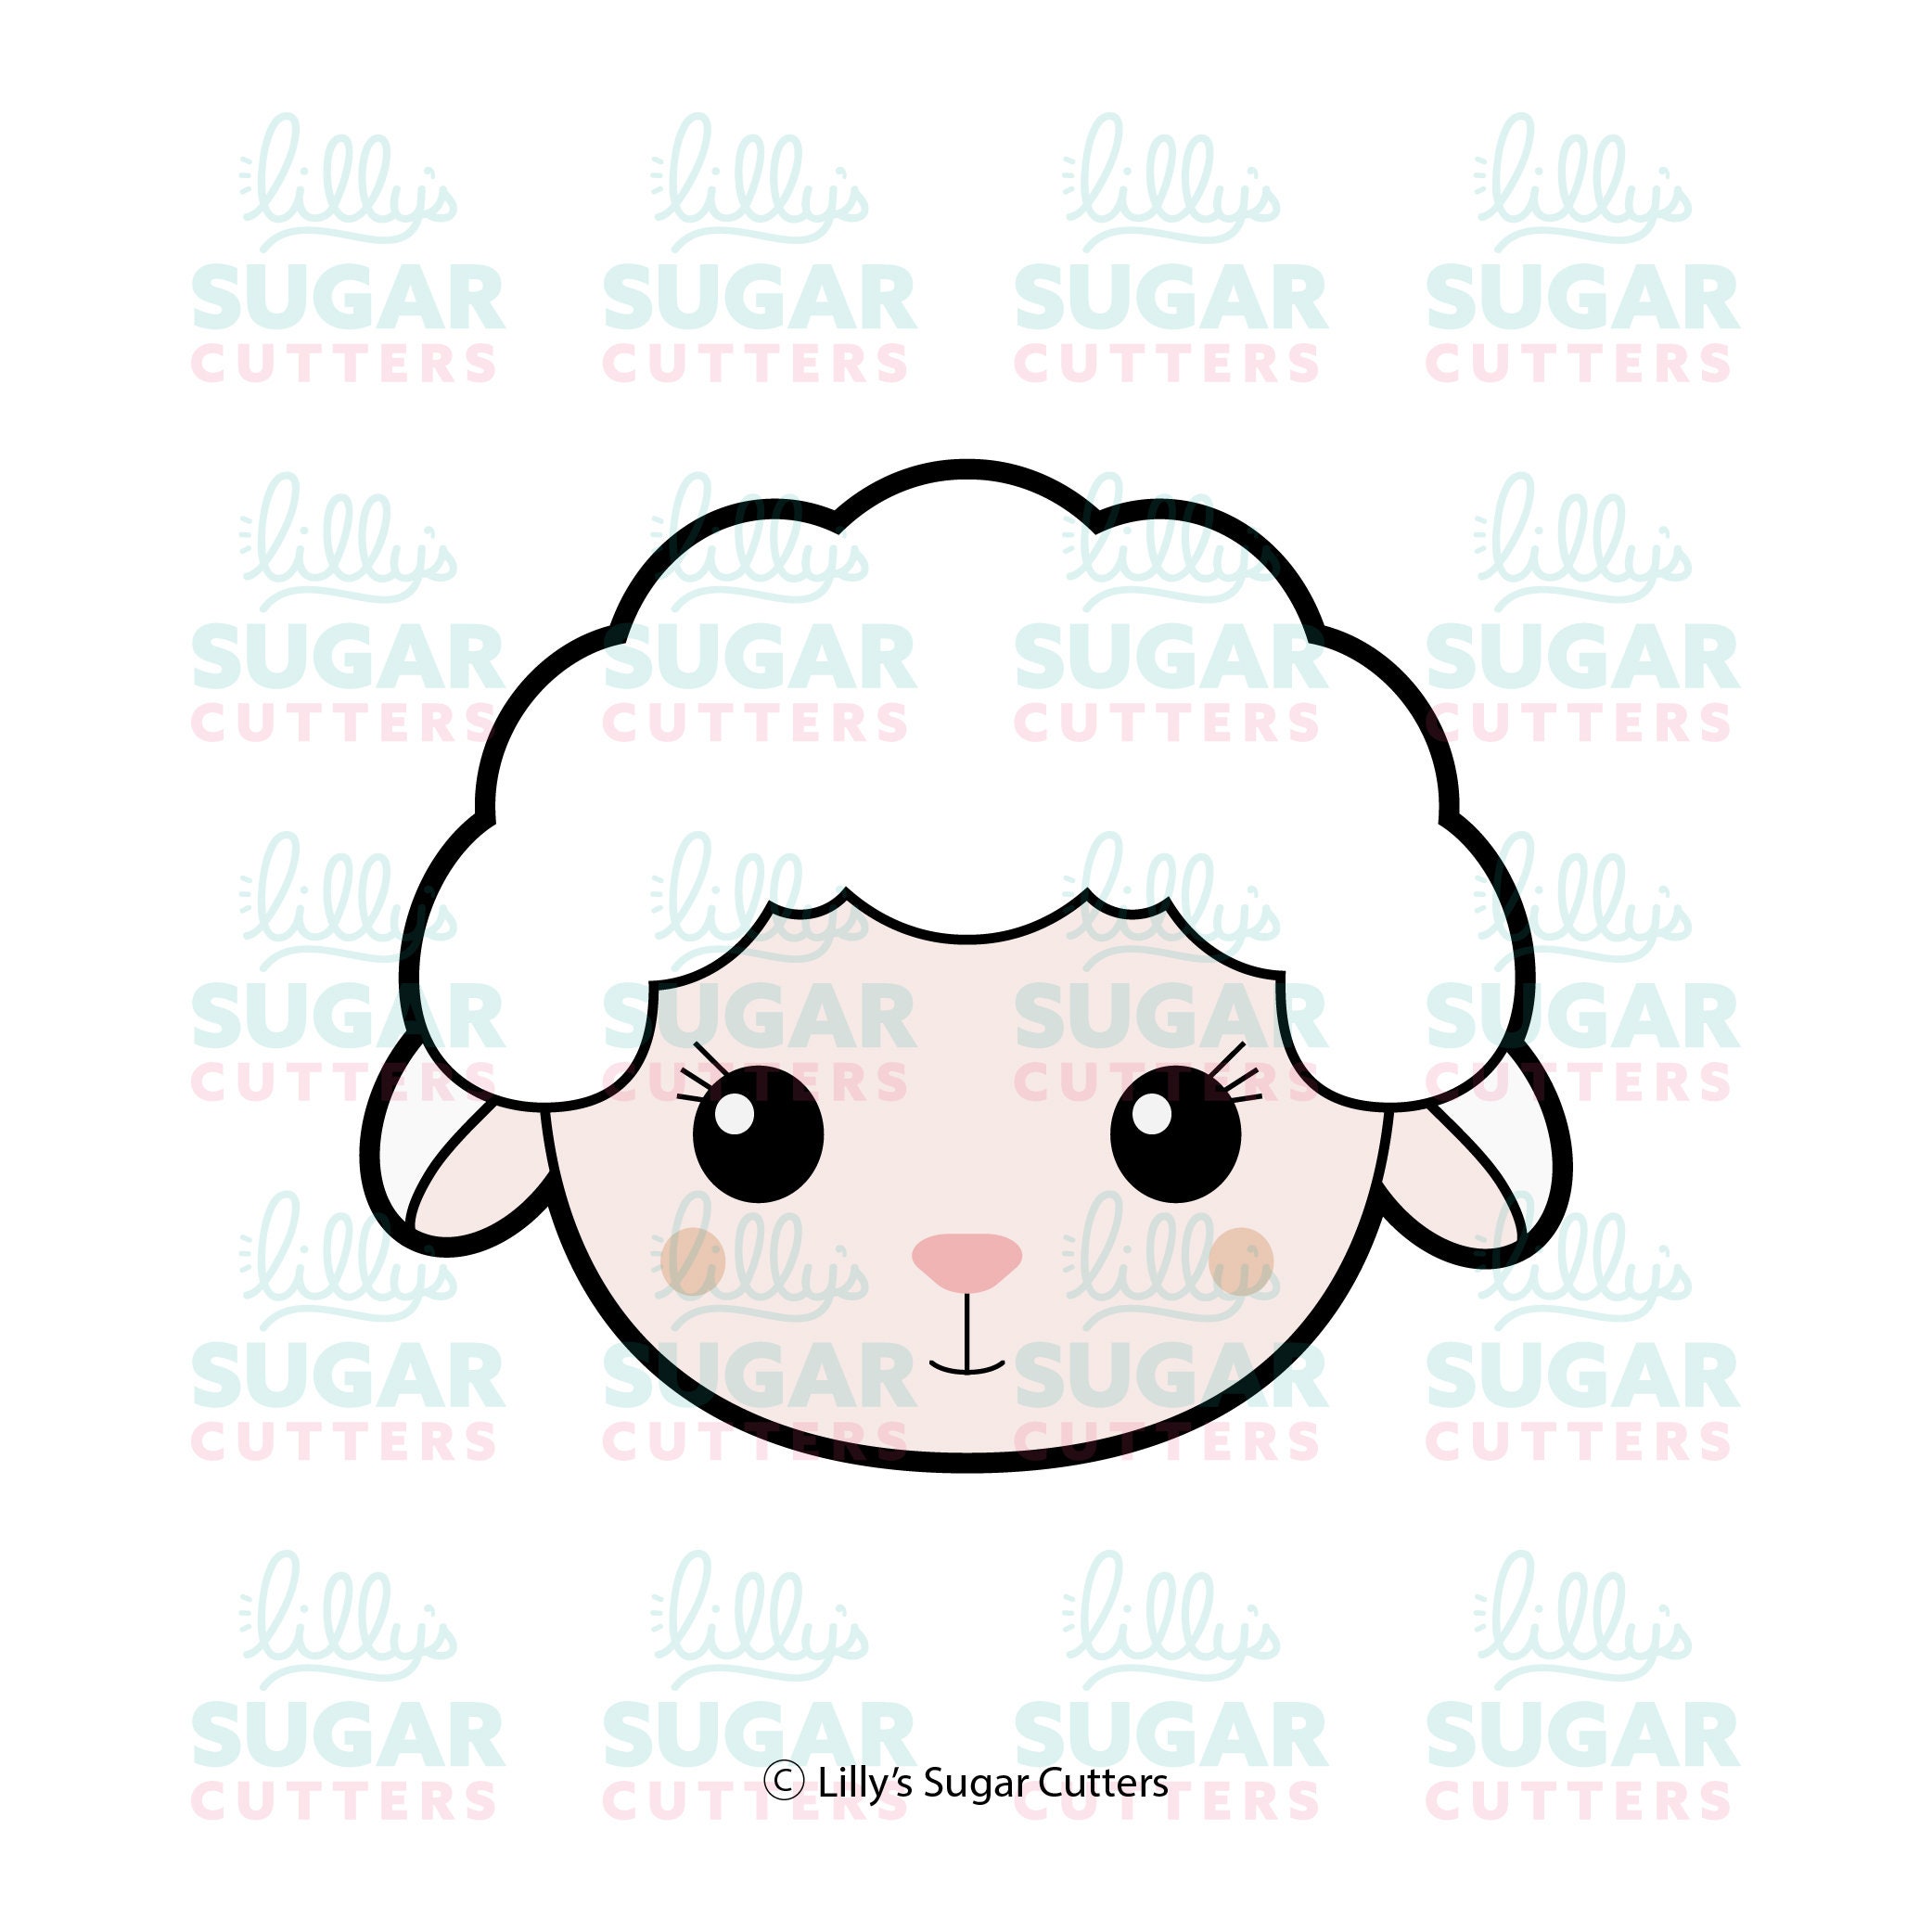 Sheep Body cookie cutter - Bake farm animal themed baby shower